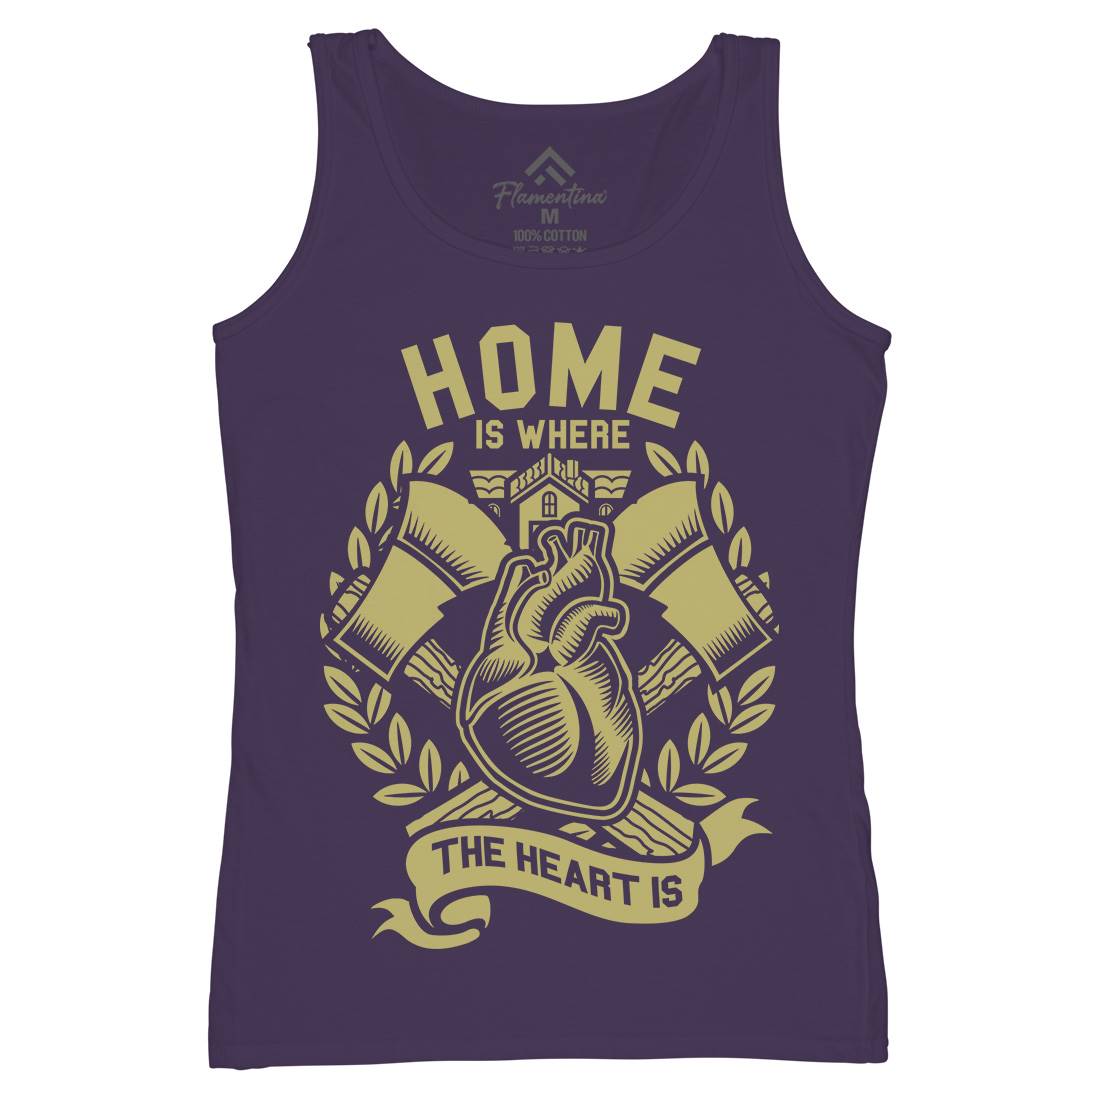 Home Womens Organic Tank Top Vest Quotes A241